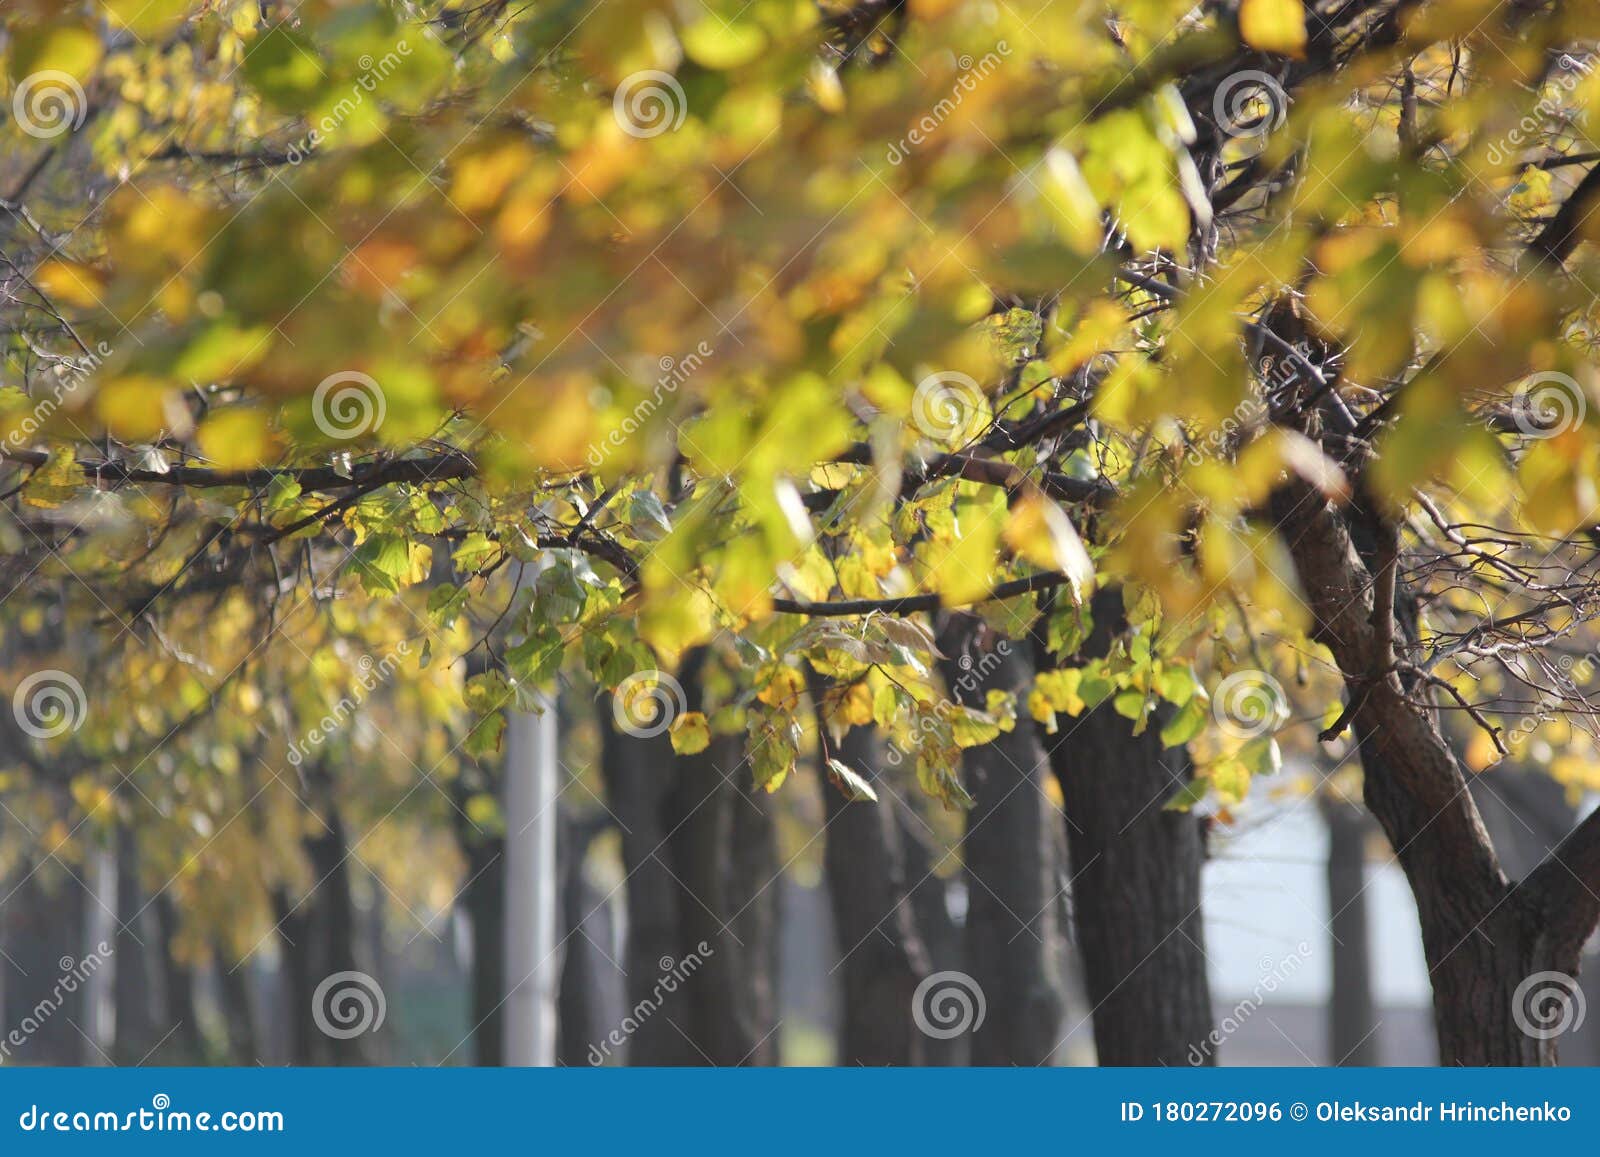 yellow leaves on trees in autumn